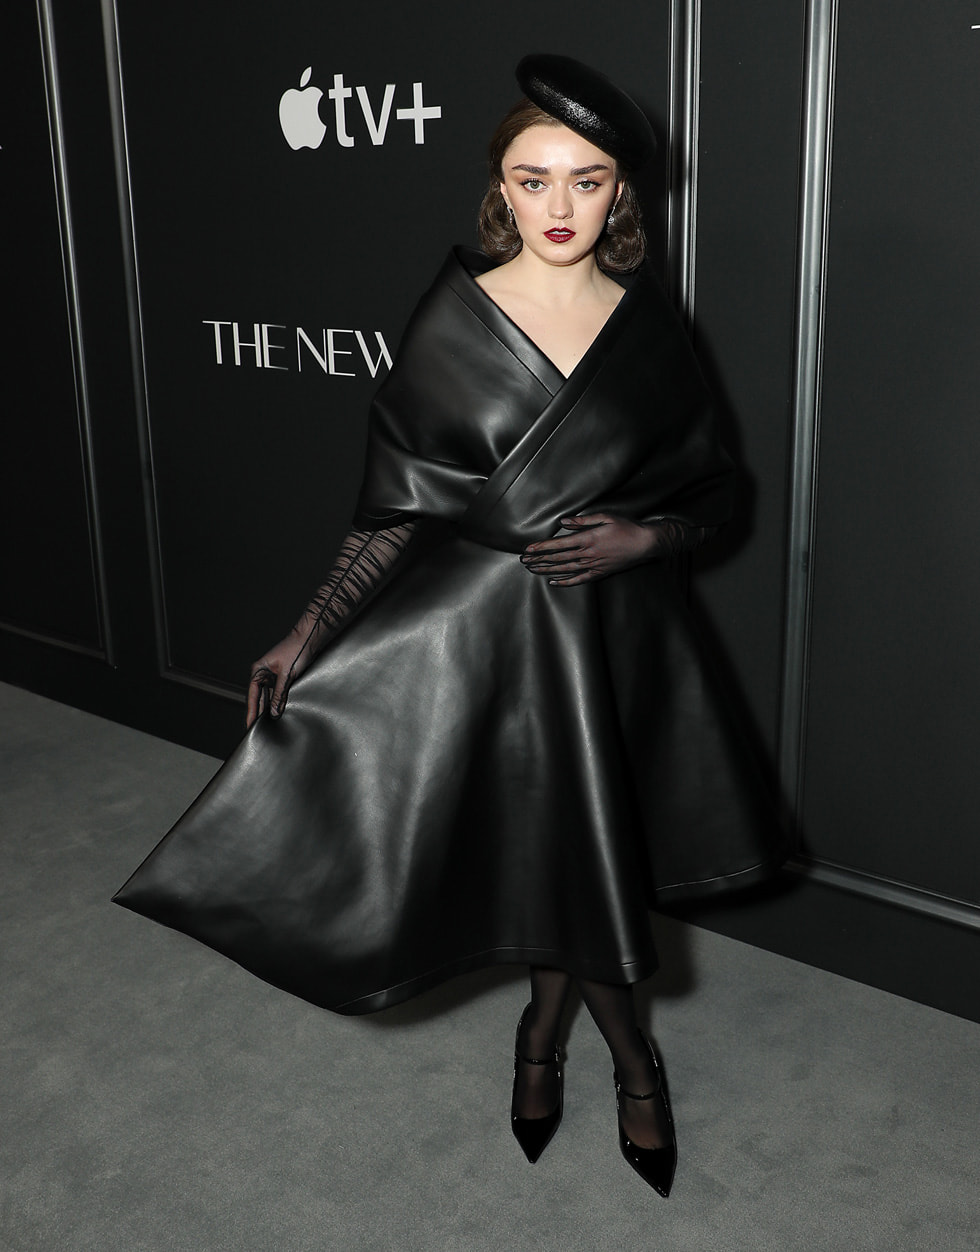 Maisie Williams attends the premiere of the Apple TV+ thrilling series “The New Look” at Florence Gould Hall. “The New Look” will make its global debut on Apple TV+ on Wednesday, February 14, 2024.